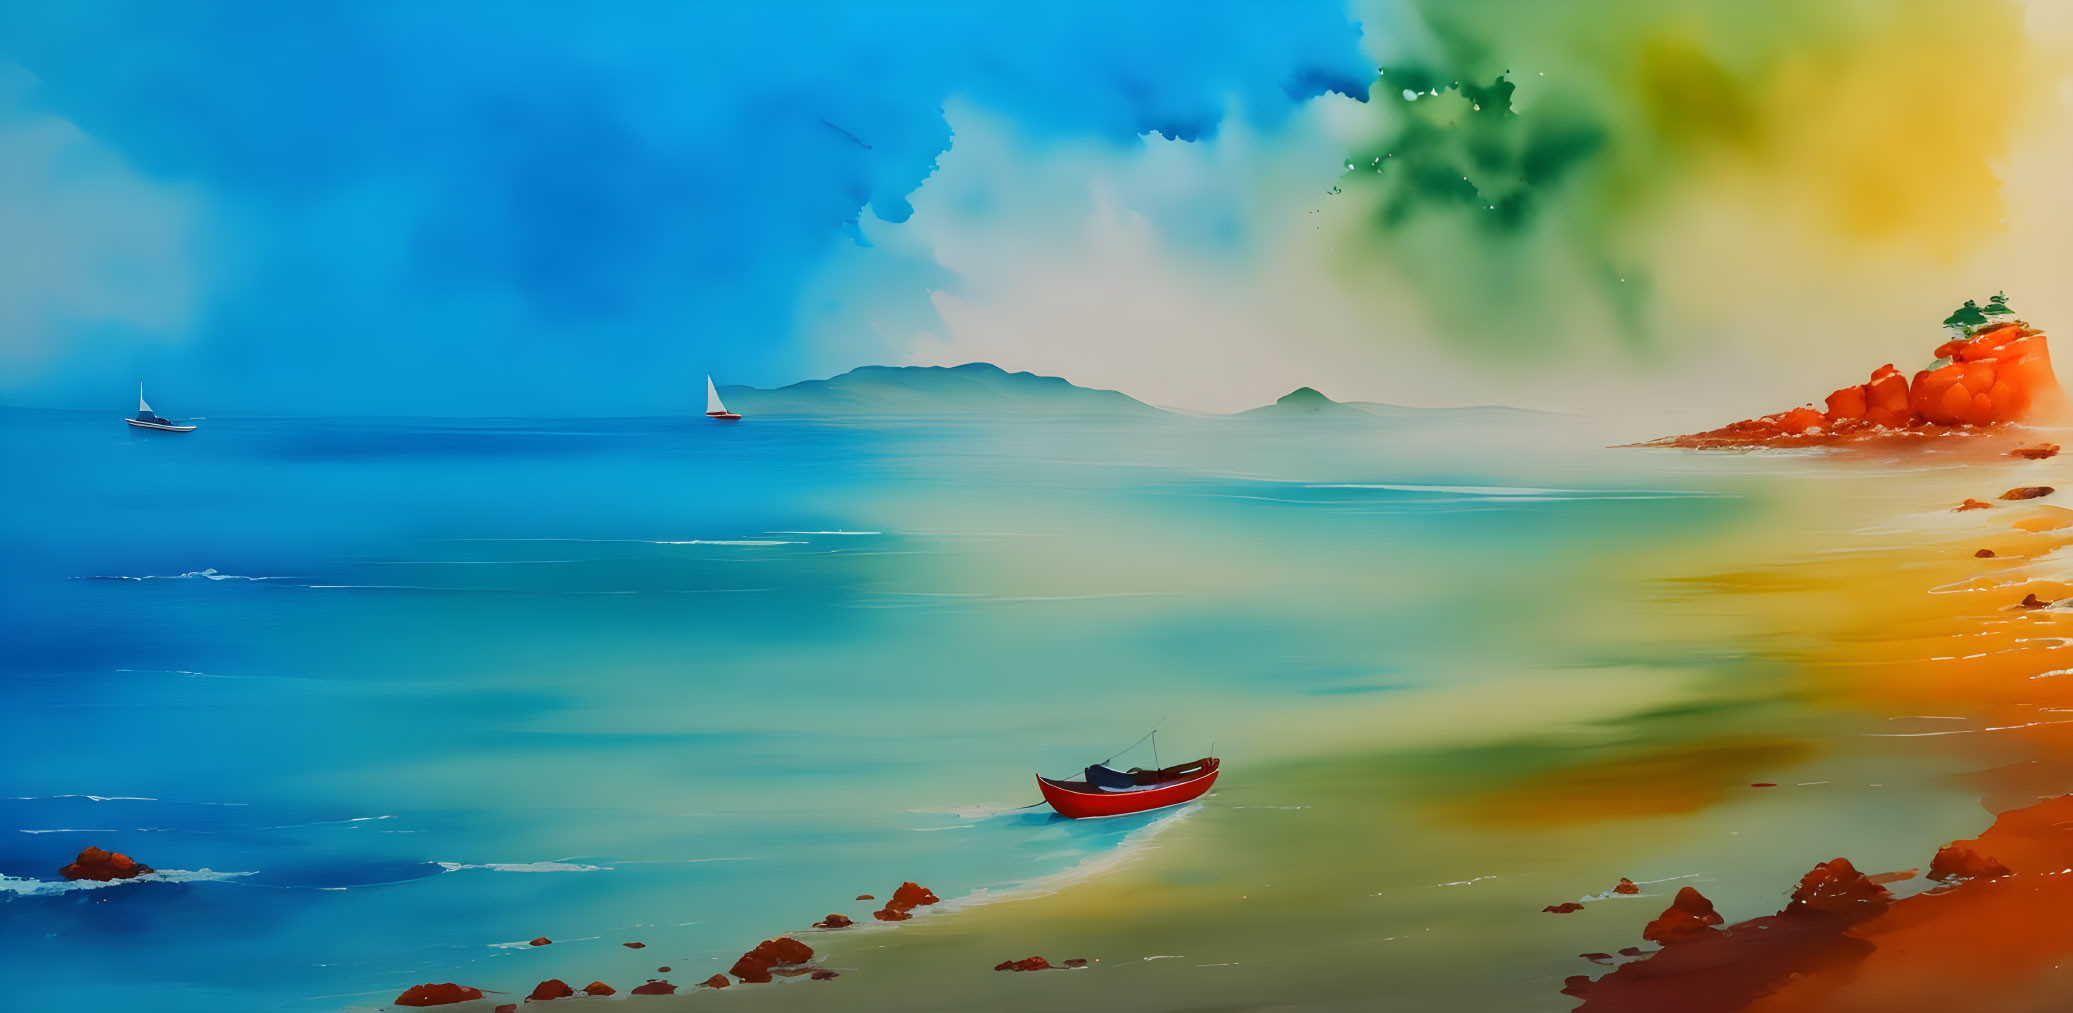 Abstract seascape painting with boats and colorful sky